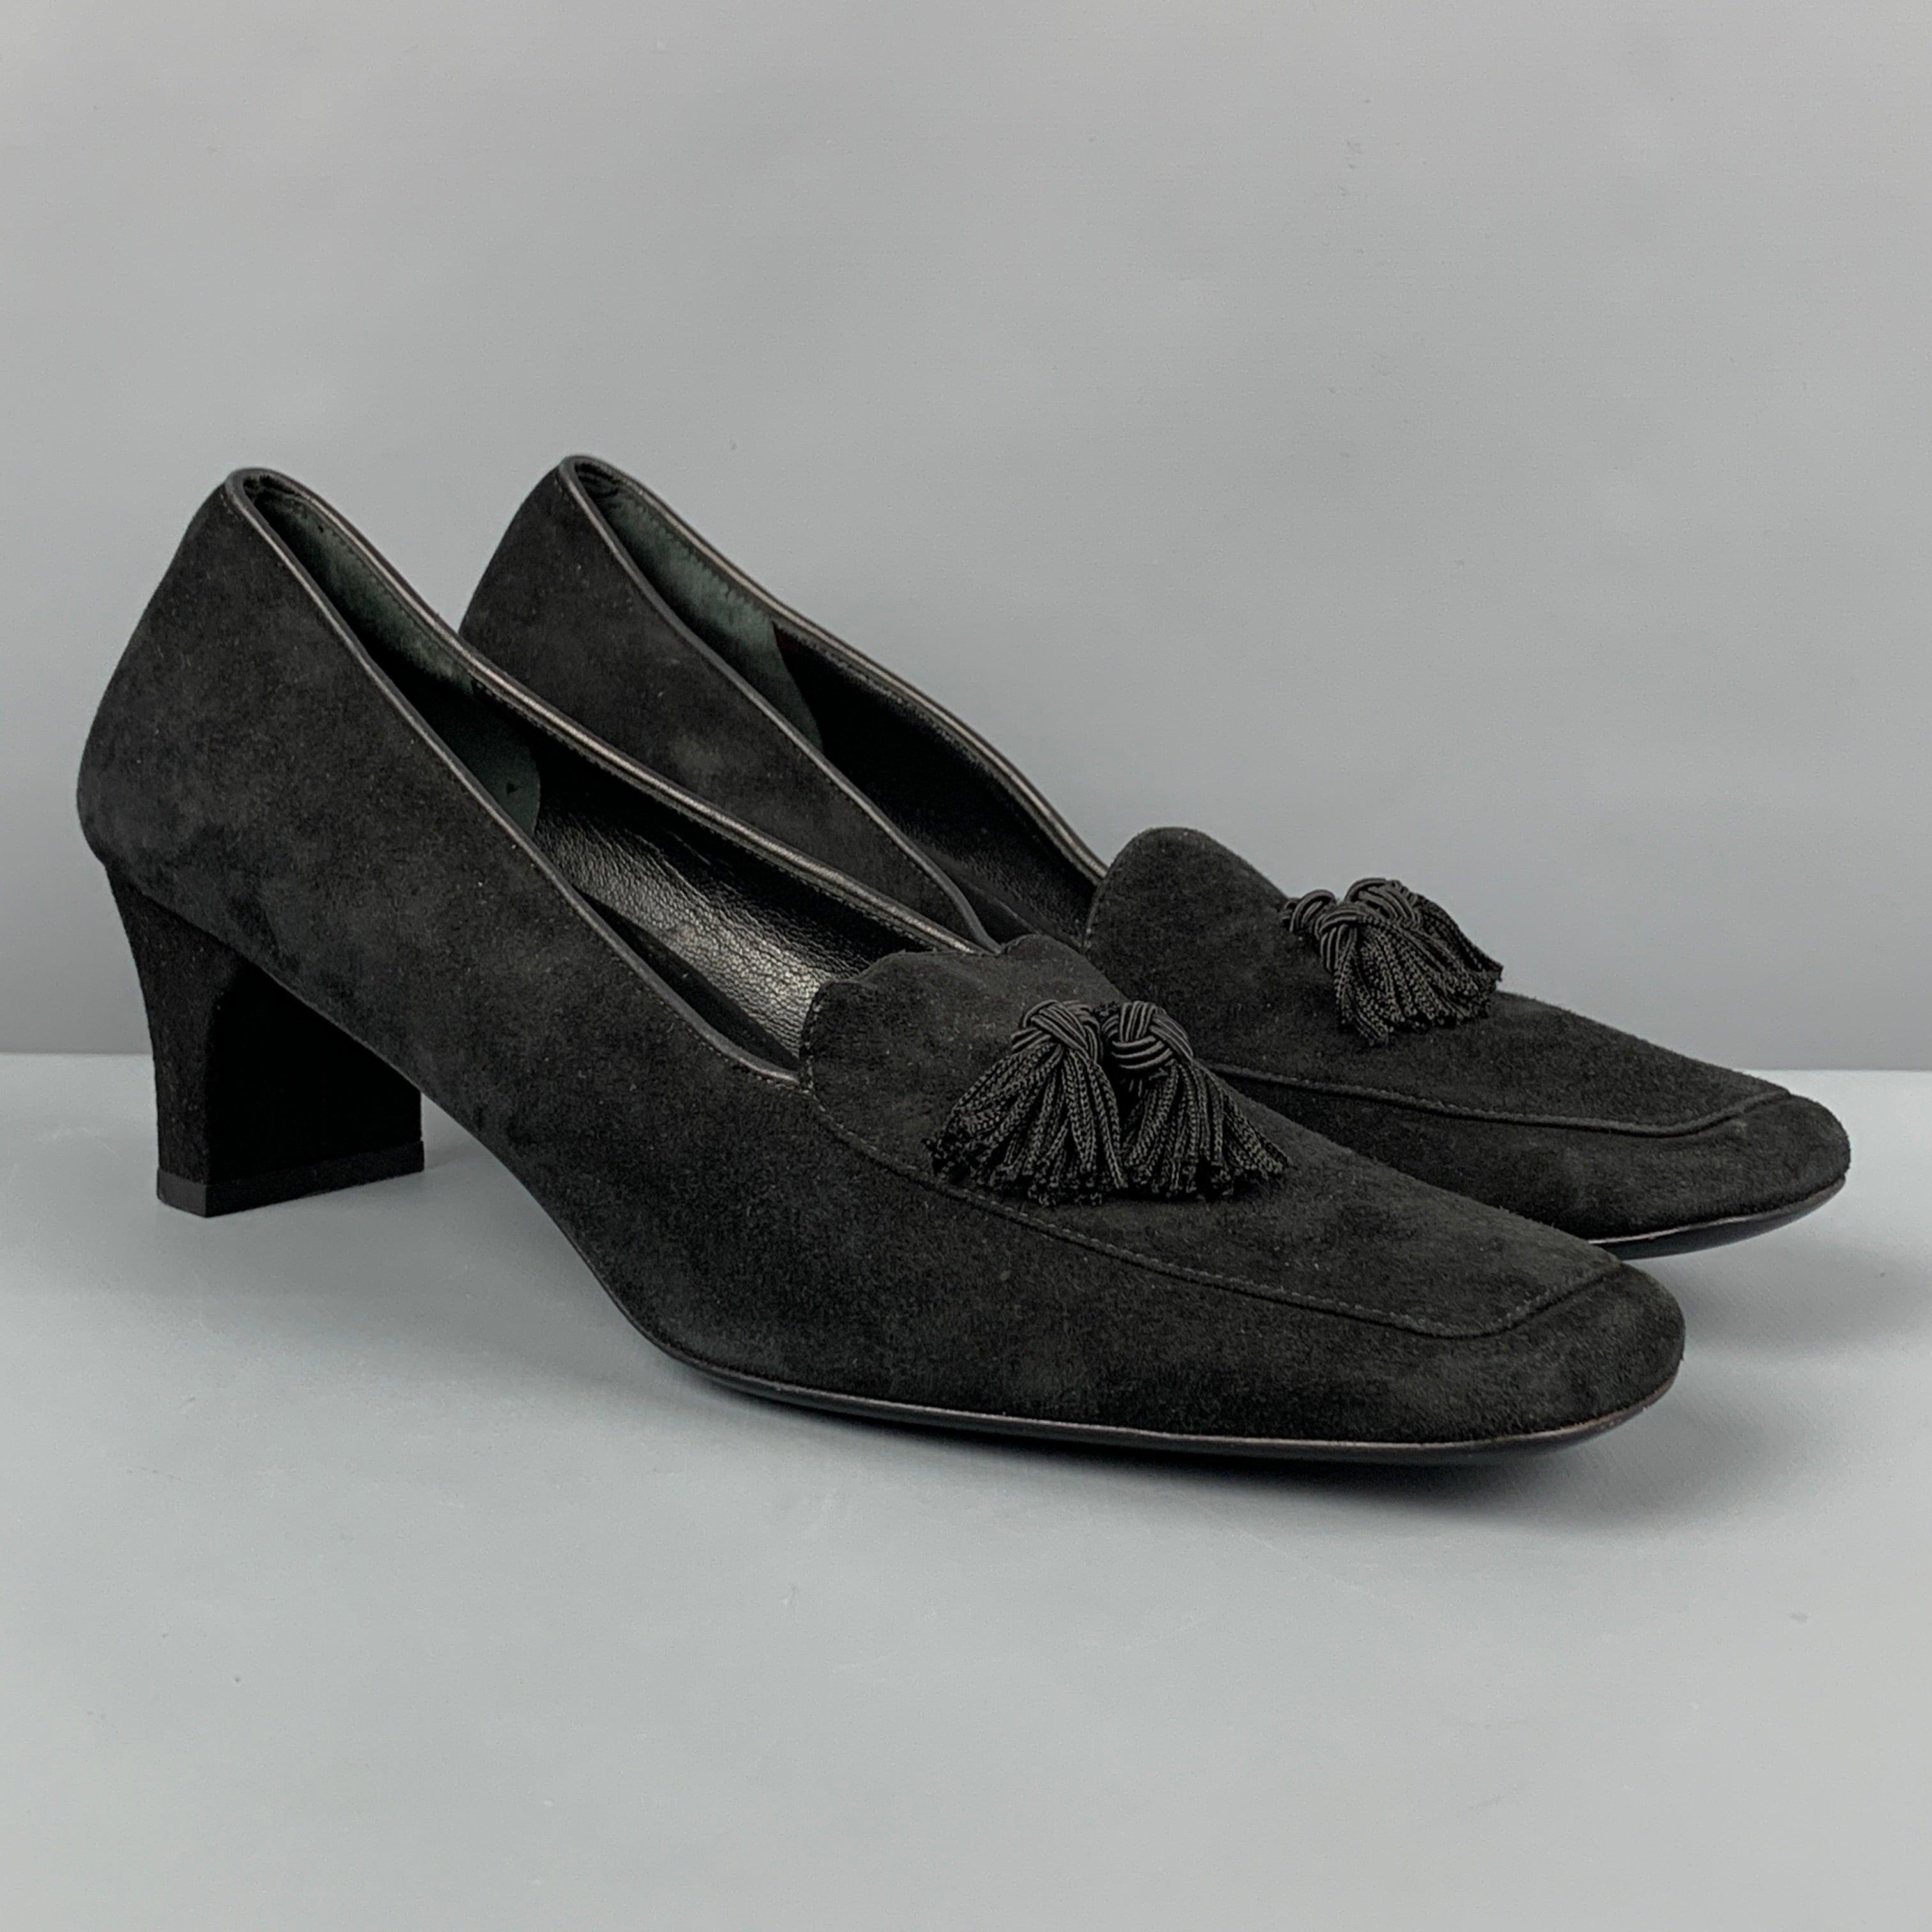 SALVATORE FERRAGAMO pumps comes in a black suede featuring a square toe, tassel details, an a kitten heel. Made in Italy.
Very Good
Pre-Owned Condition. 

Marked:   9 

Measurements: 
  Heel: 2.25 inches 
  
  
 
Reference: 118977
Category: